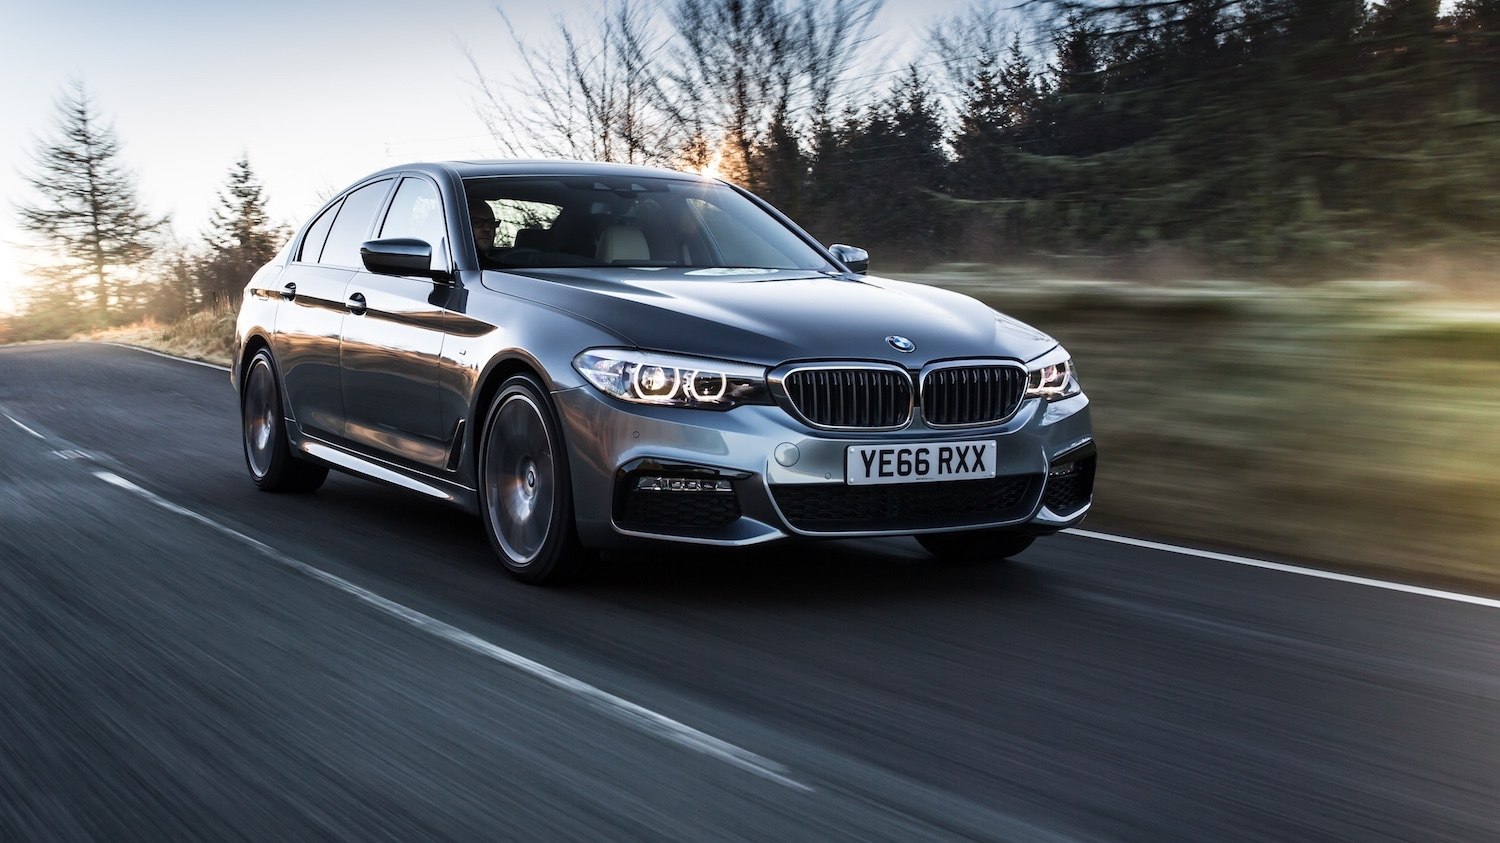 BMW 530d M Sport reviewed by Tom Scanlan for Drive 10